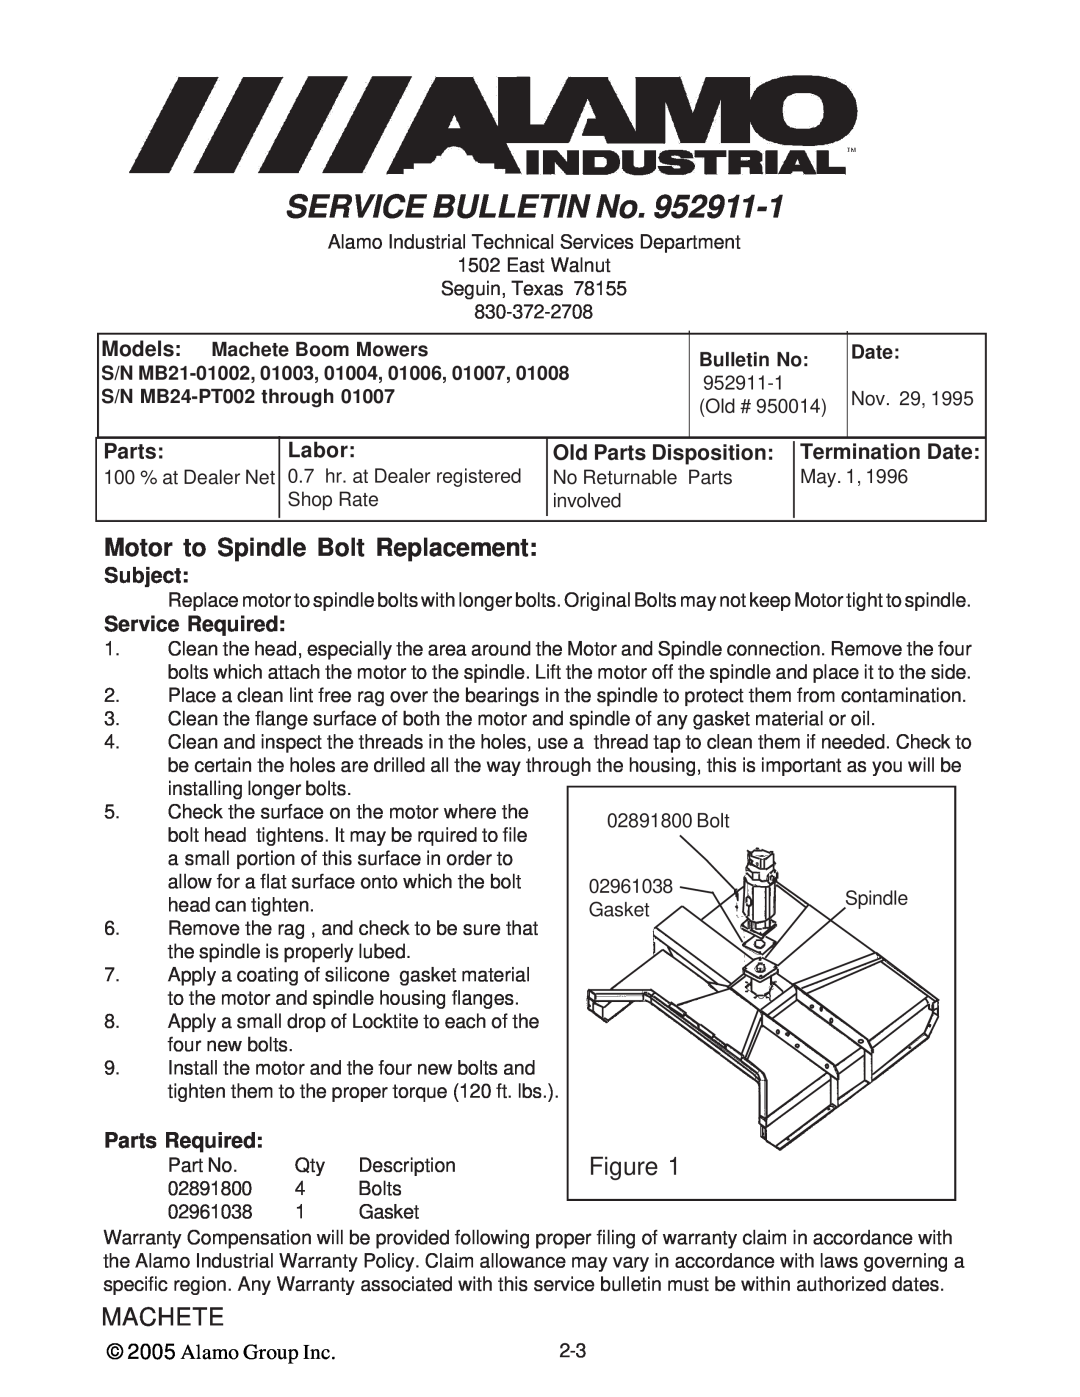 Alamo T 7740 Motor to Spindle Bolt Replacement, 952911-1, S/N MB24-PT002through, Nov. 29, SERVICE BULLETIN No, Figure 